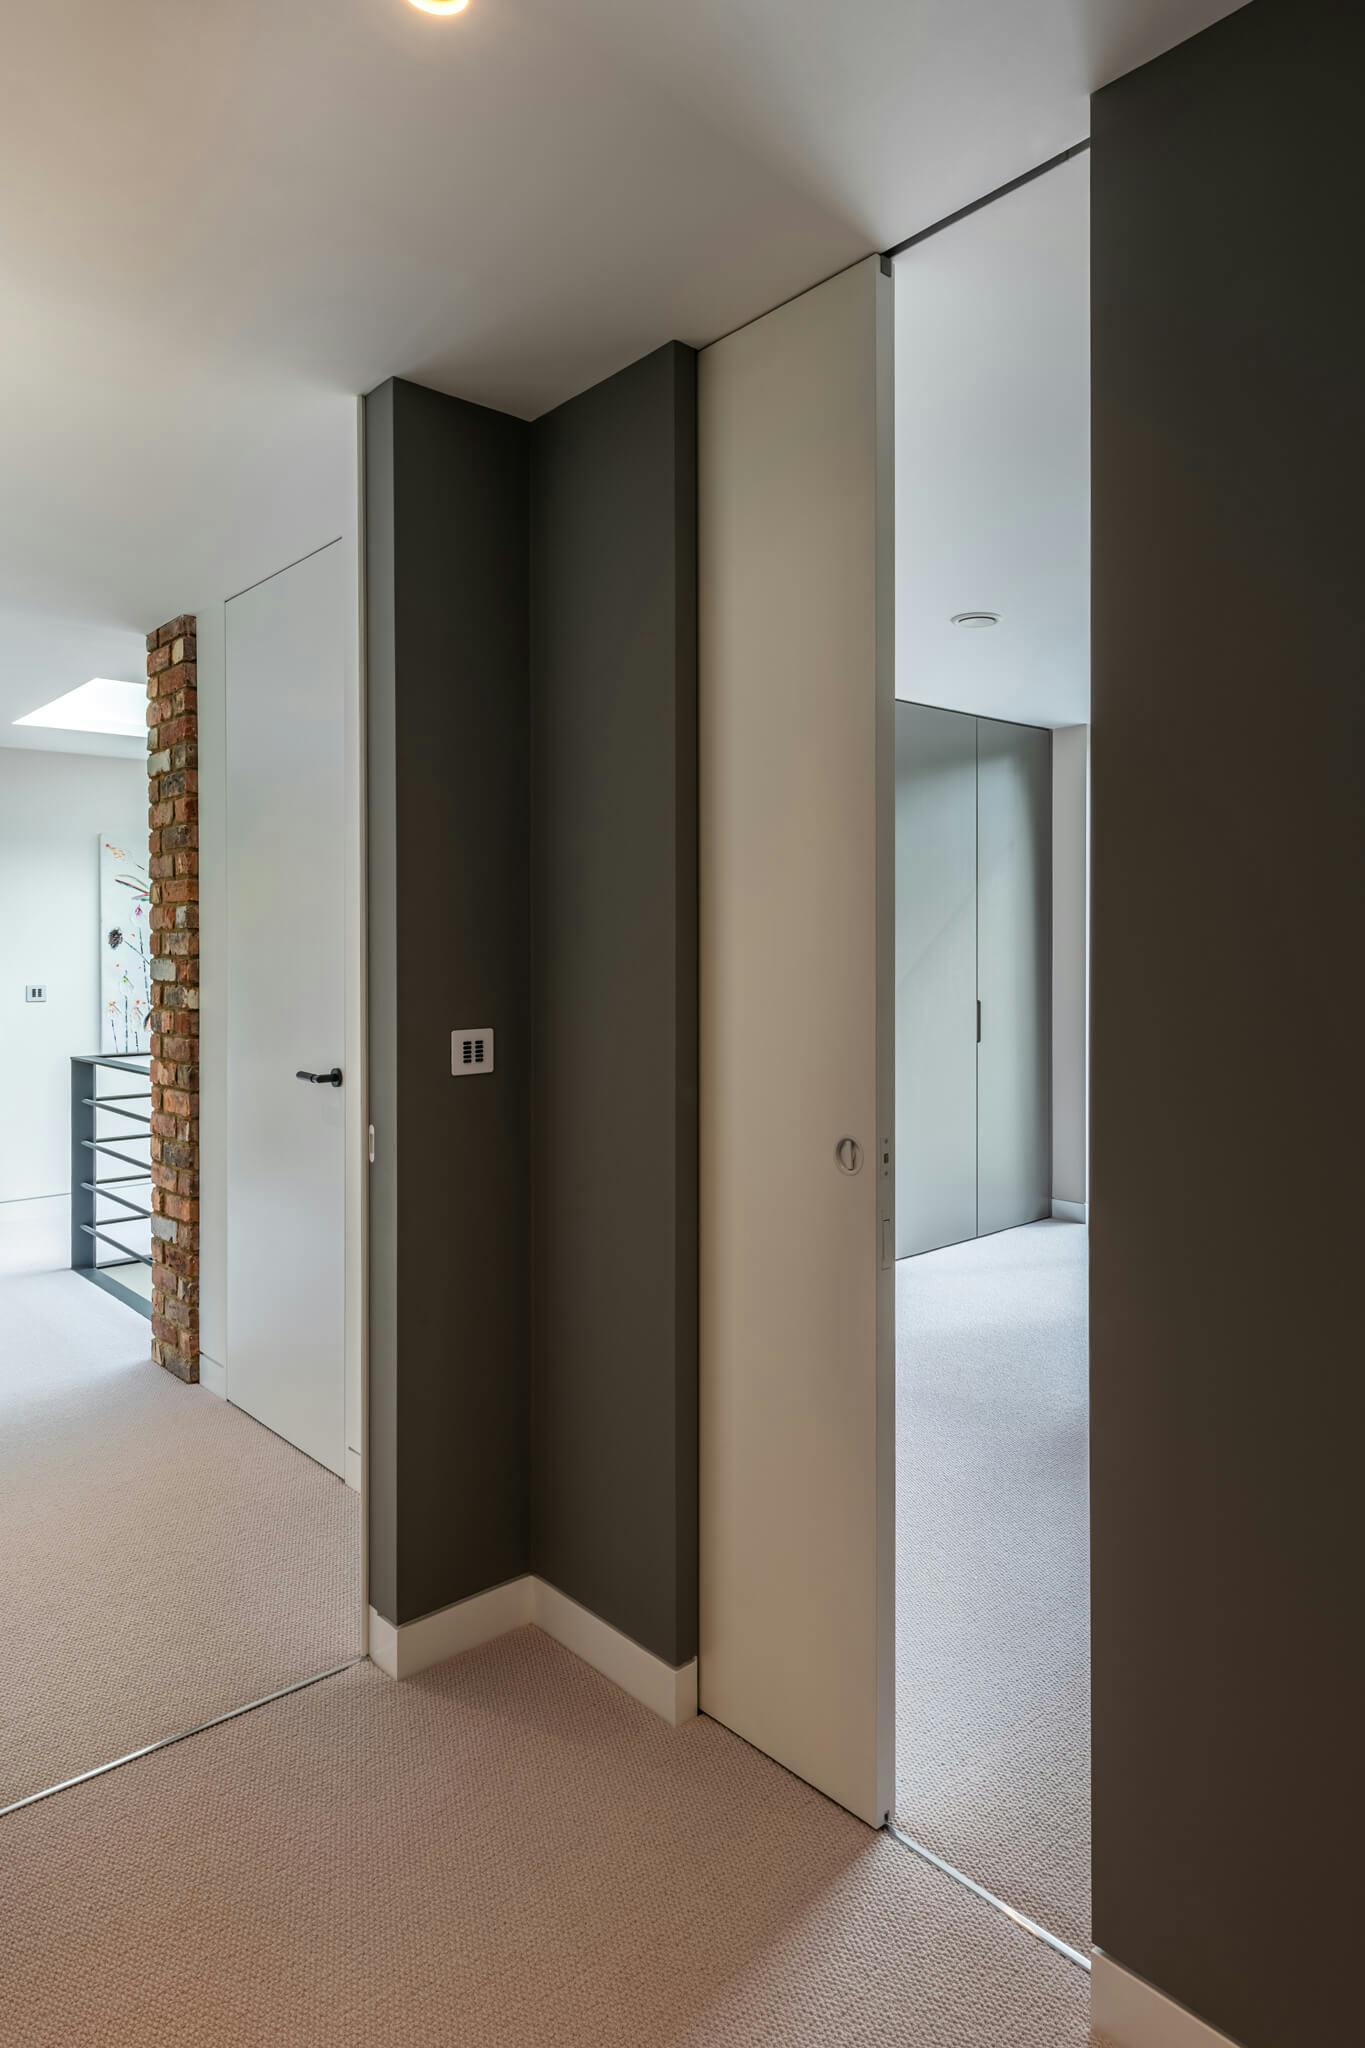 A contemporary upstairs reception area with a flush door and sliding door leading into a carpeted bedroom with dark grey walls.